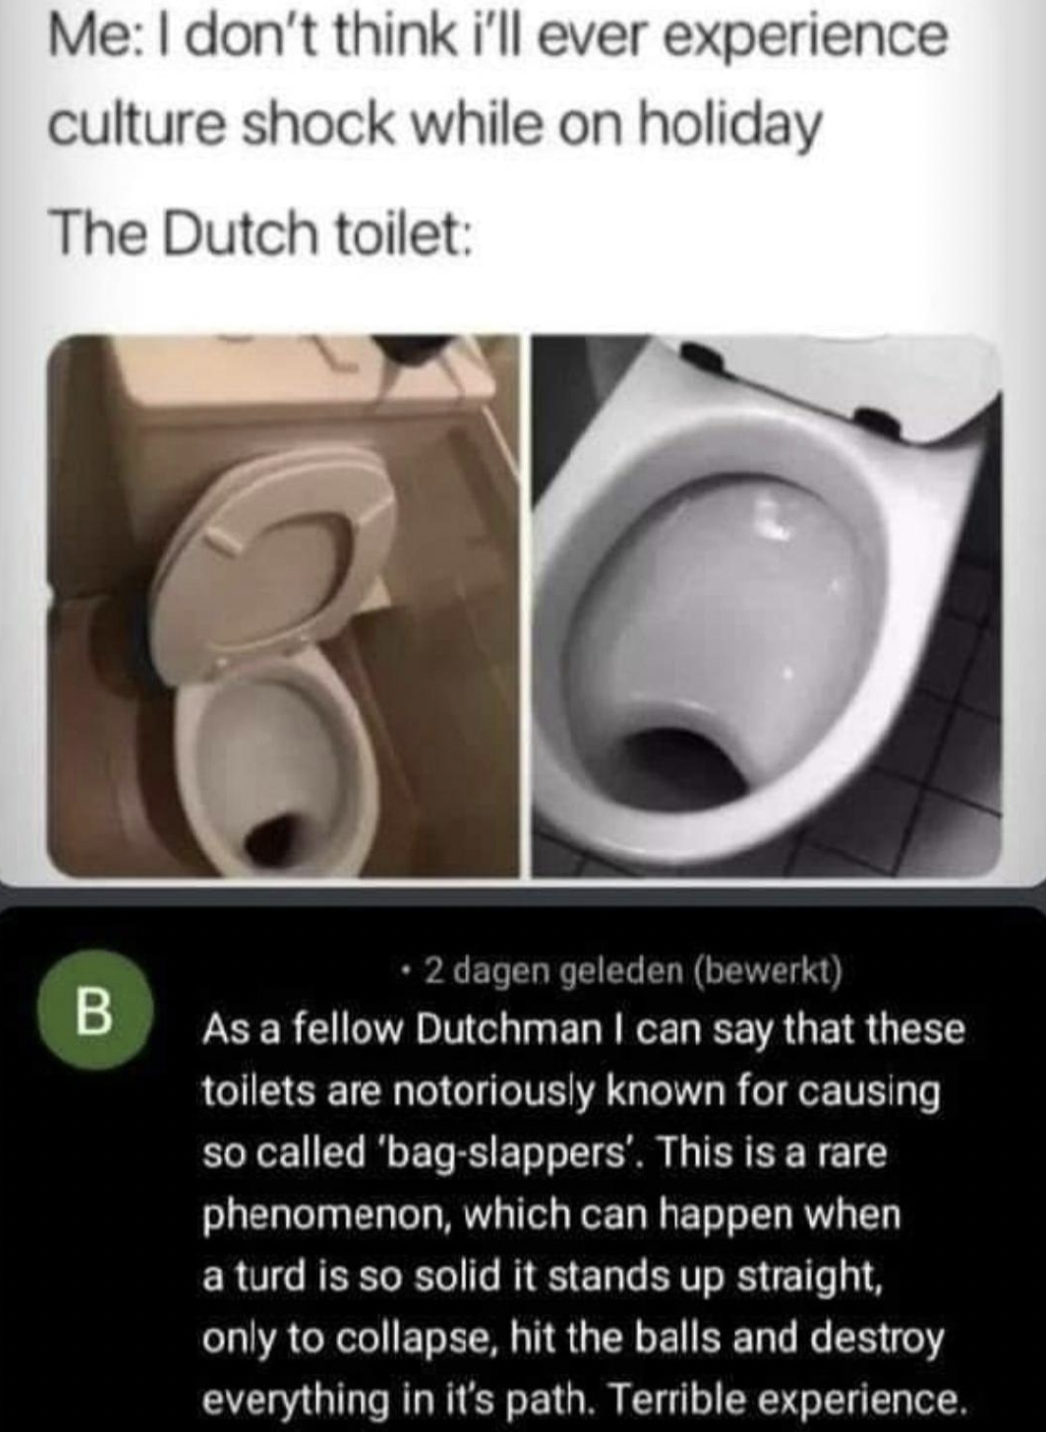 Cringey Pics - dutch toilet bag slapper - Me I don't think i'll ever experience culture shock while on holiday The Dutch toilet 2 dagen geleden bewerkt B As a fellow Dutchman I can say that these toilets are notoriously known for causing so called 'bagsla